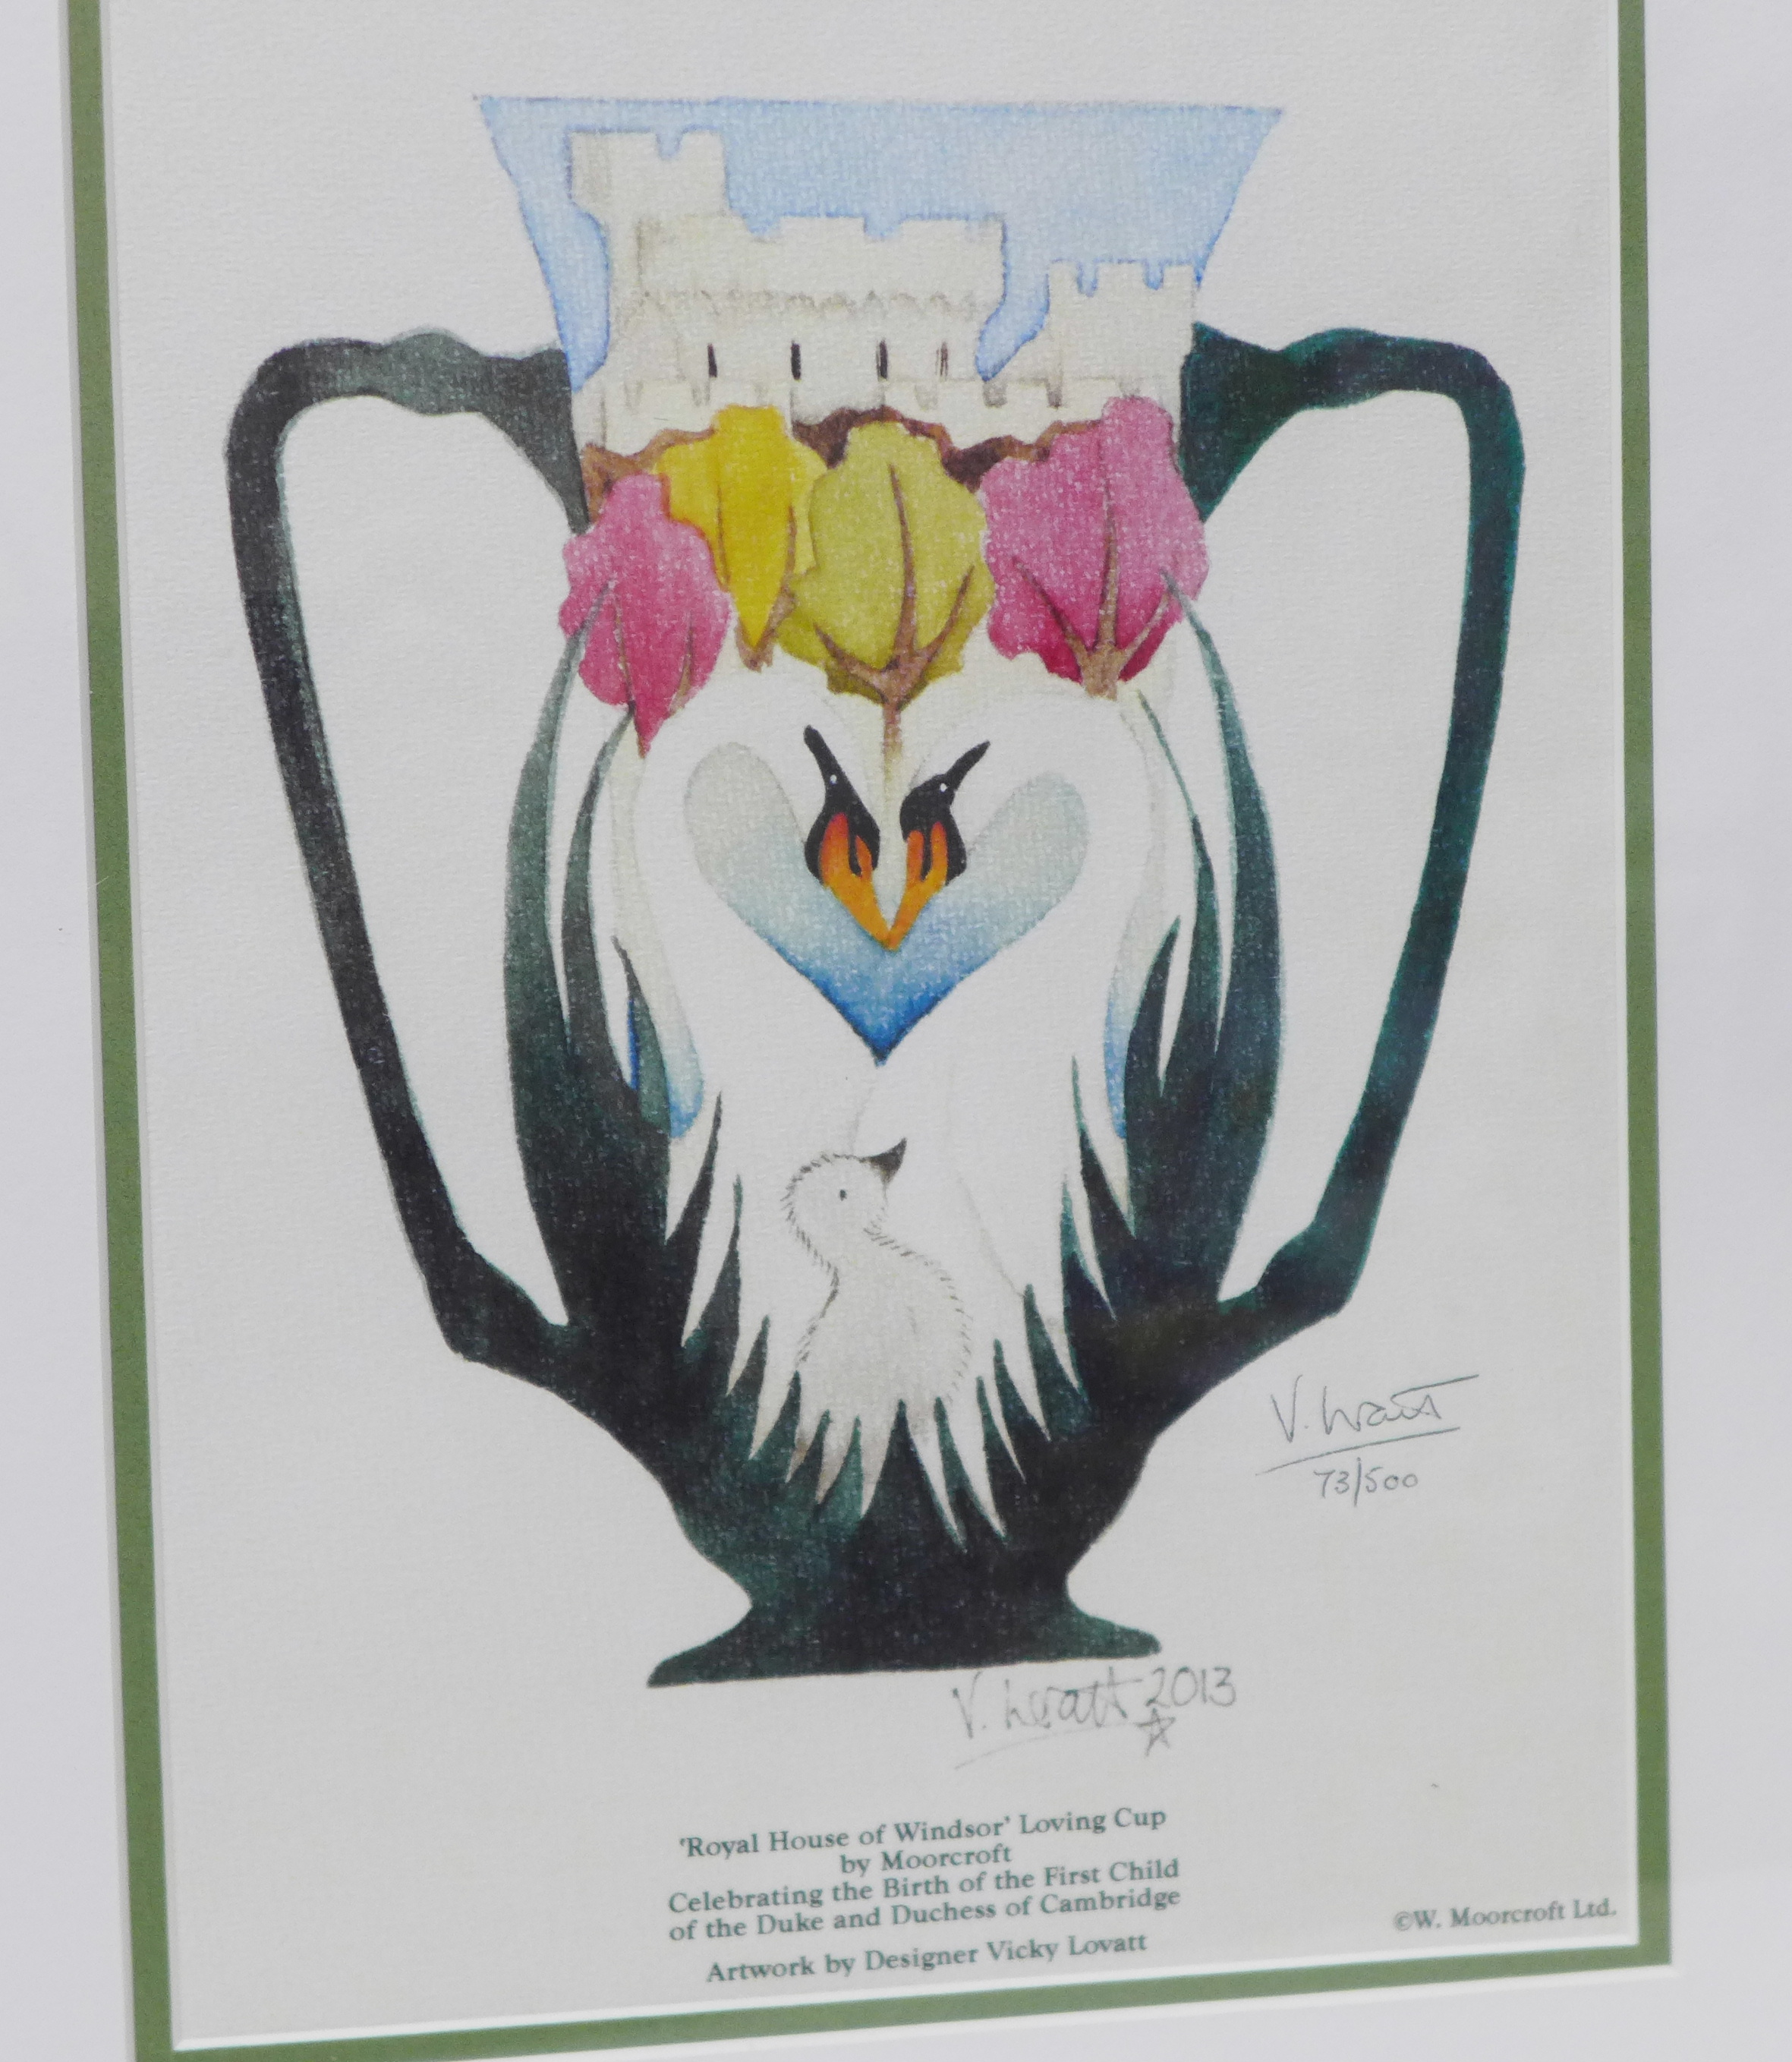 A Moorcroft limited edition print, Royal House of Windsor Loving Cup, 73/500, signed by Vicki Lovatt - Image 2 of 2